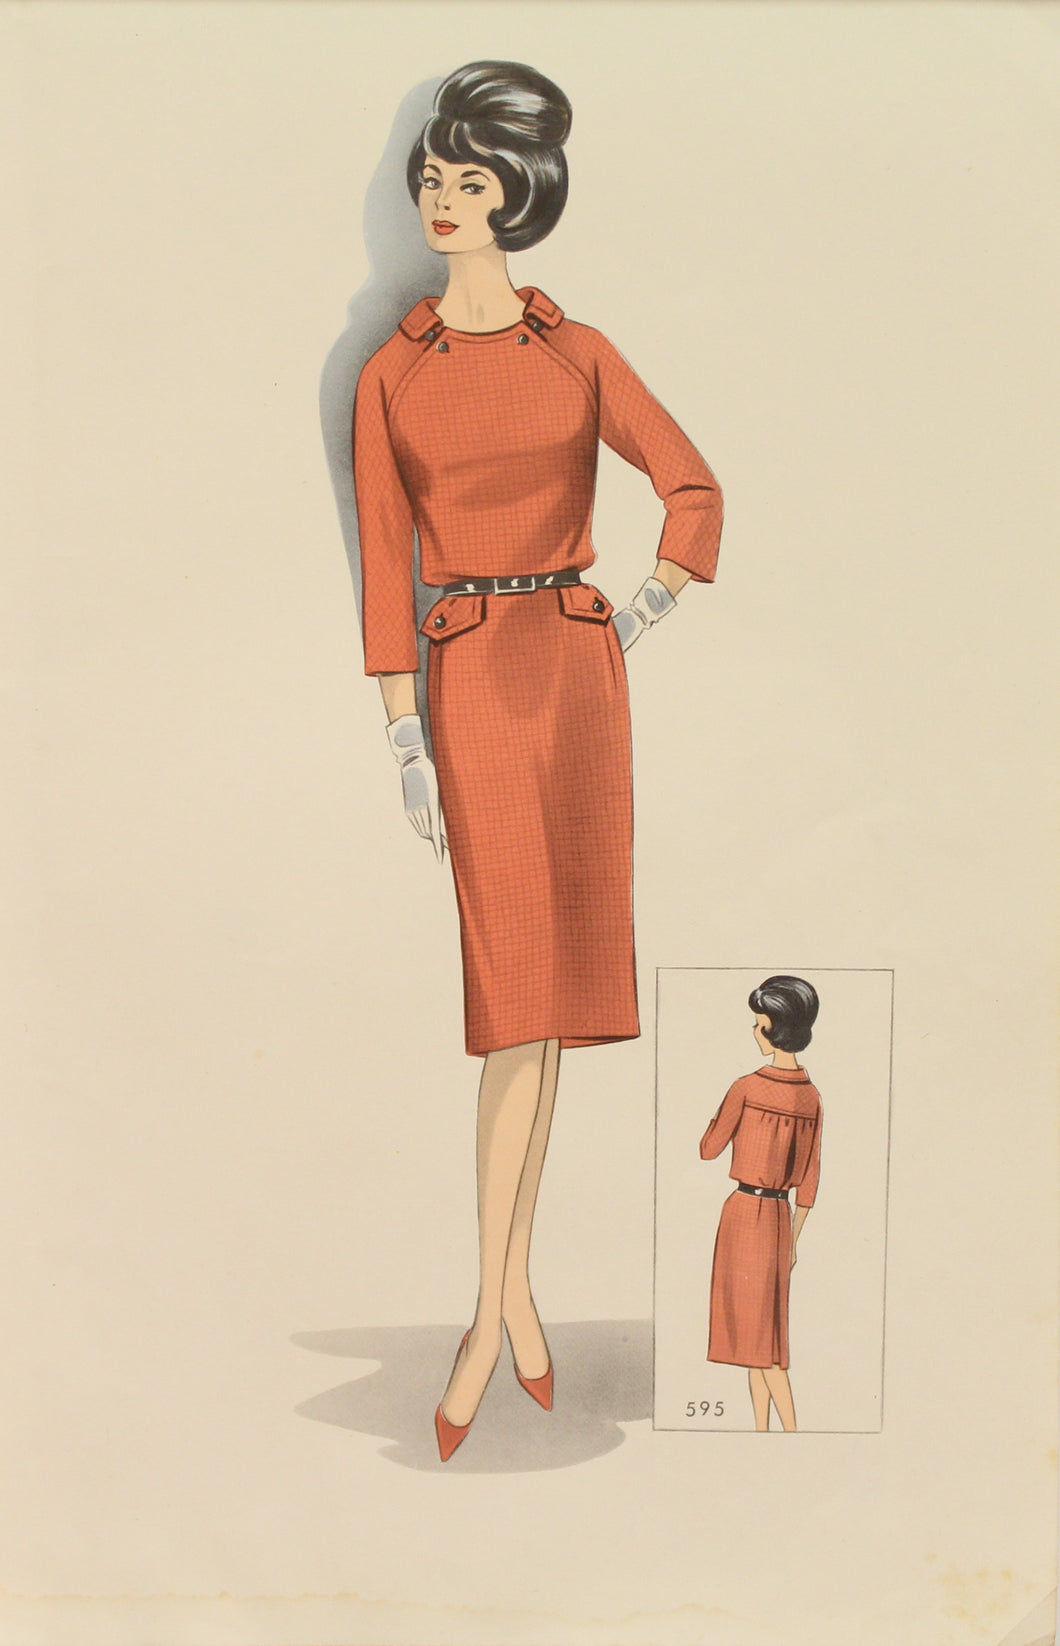 Fashion of the 60s, New Lines from the Fashions in Vienna, Mode Studio, 595, 1965